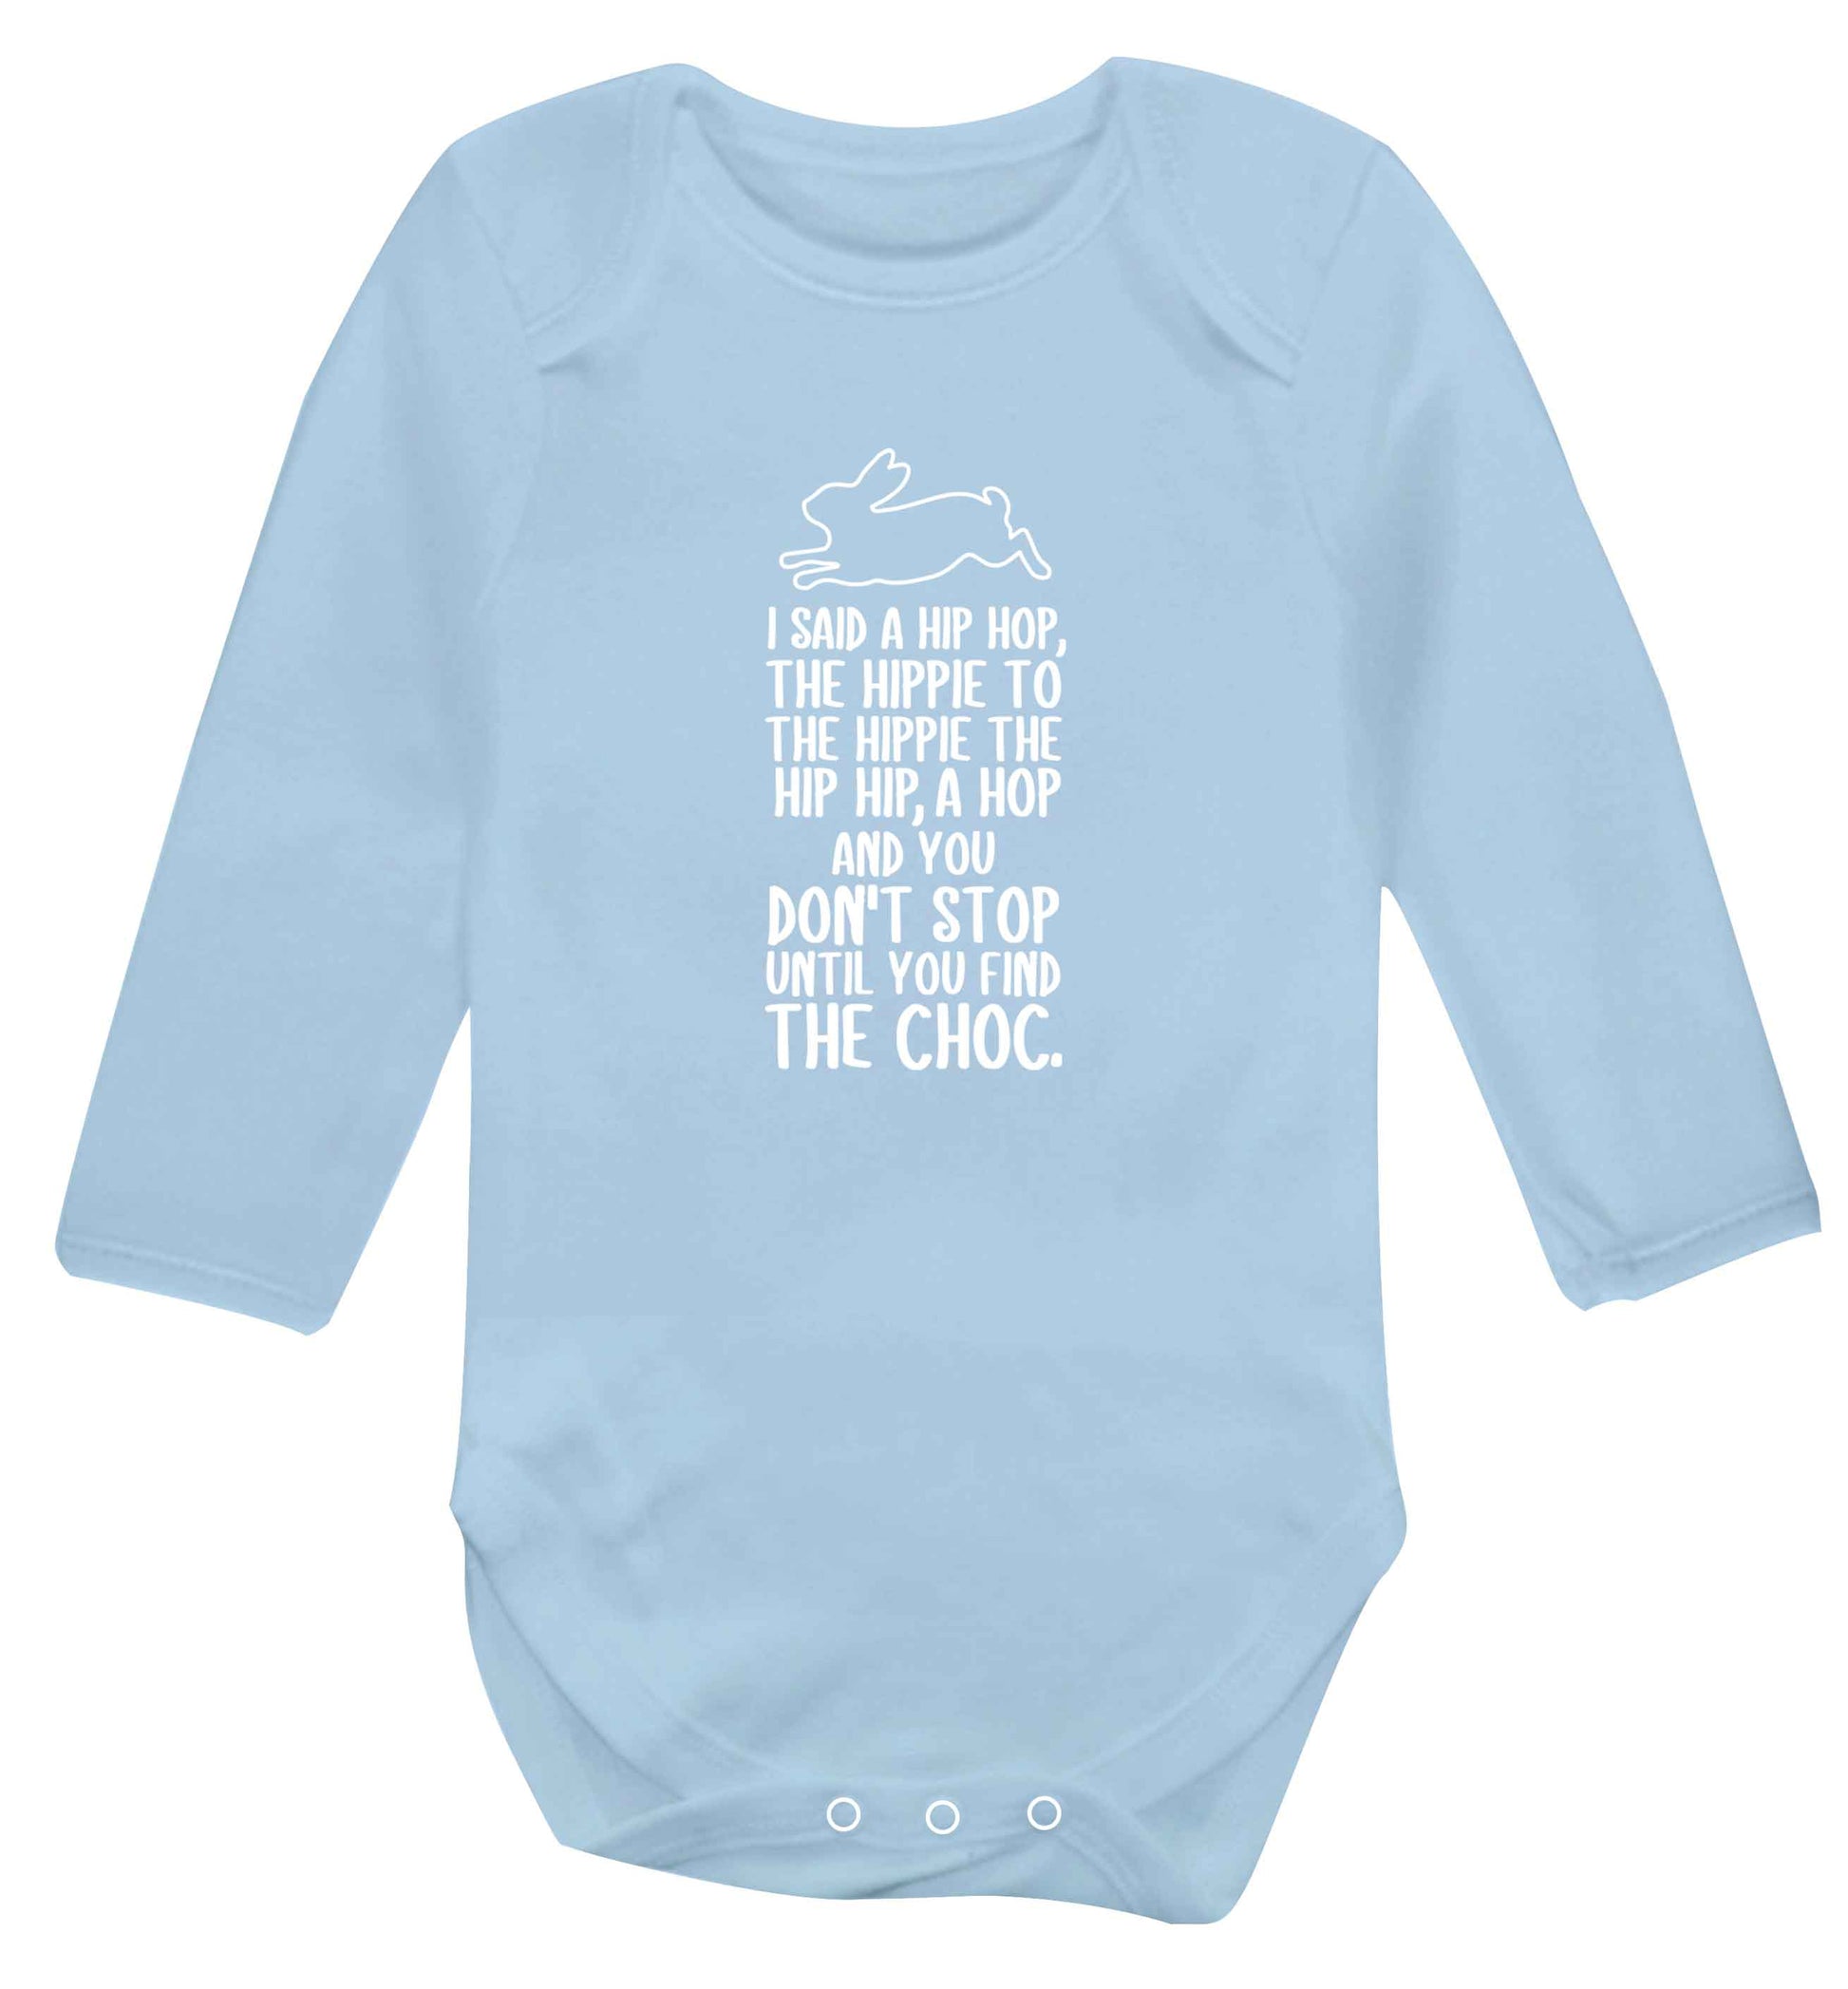 Don't stop until you find the choc baby vest long sleeved pale blue 6-12 months